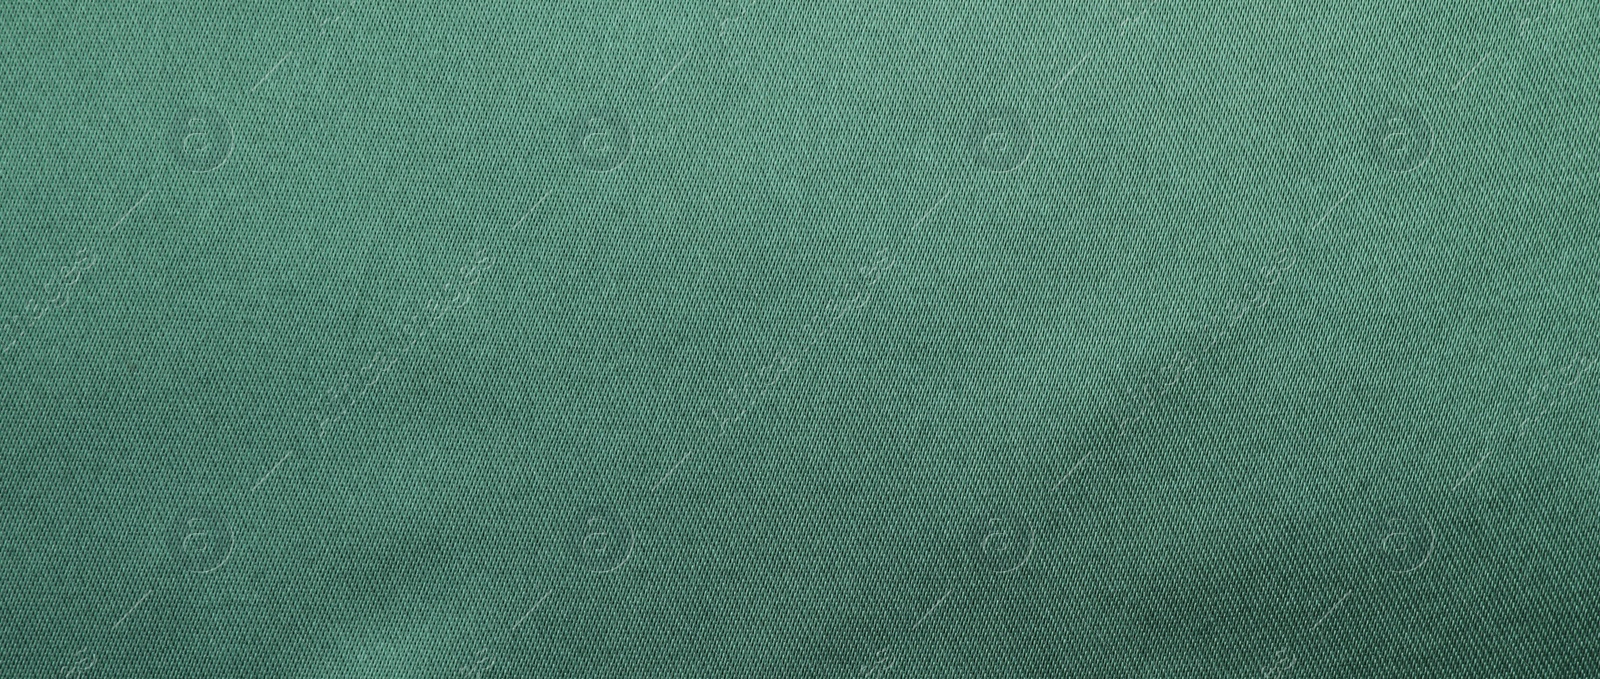 Photo of Texture of green silk fabric as background, top view